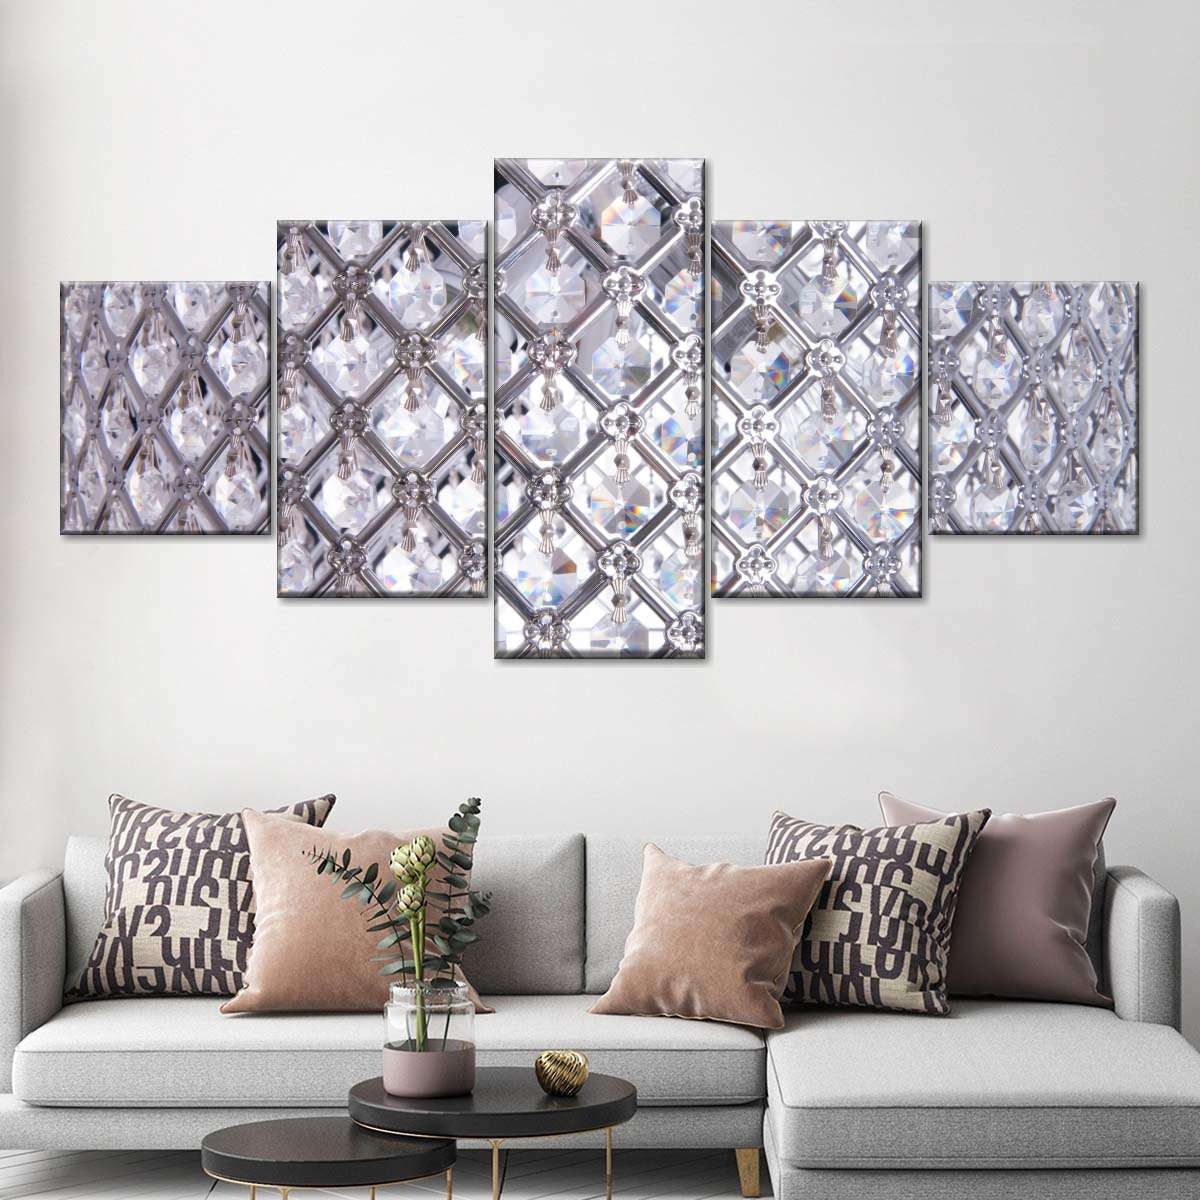 Top Silver Wall Art Ideas for Every Room